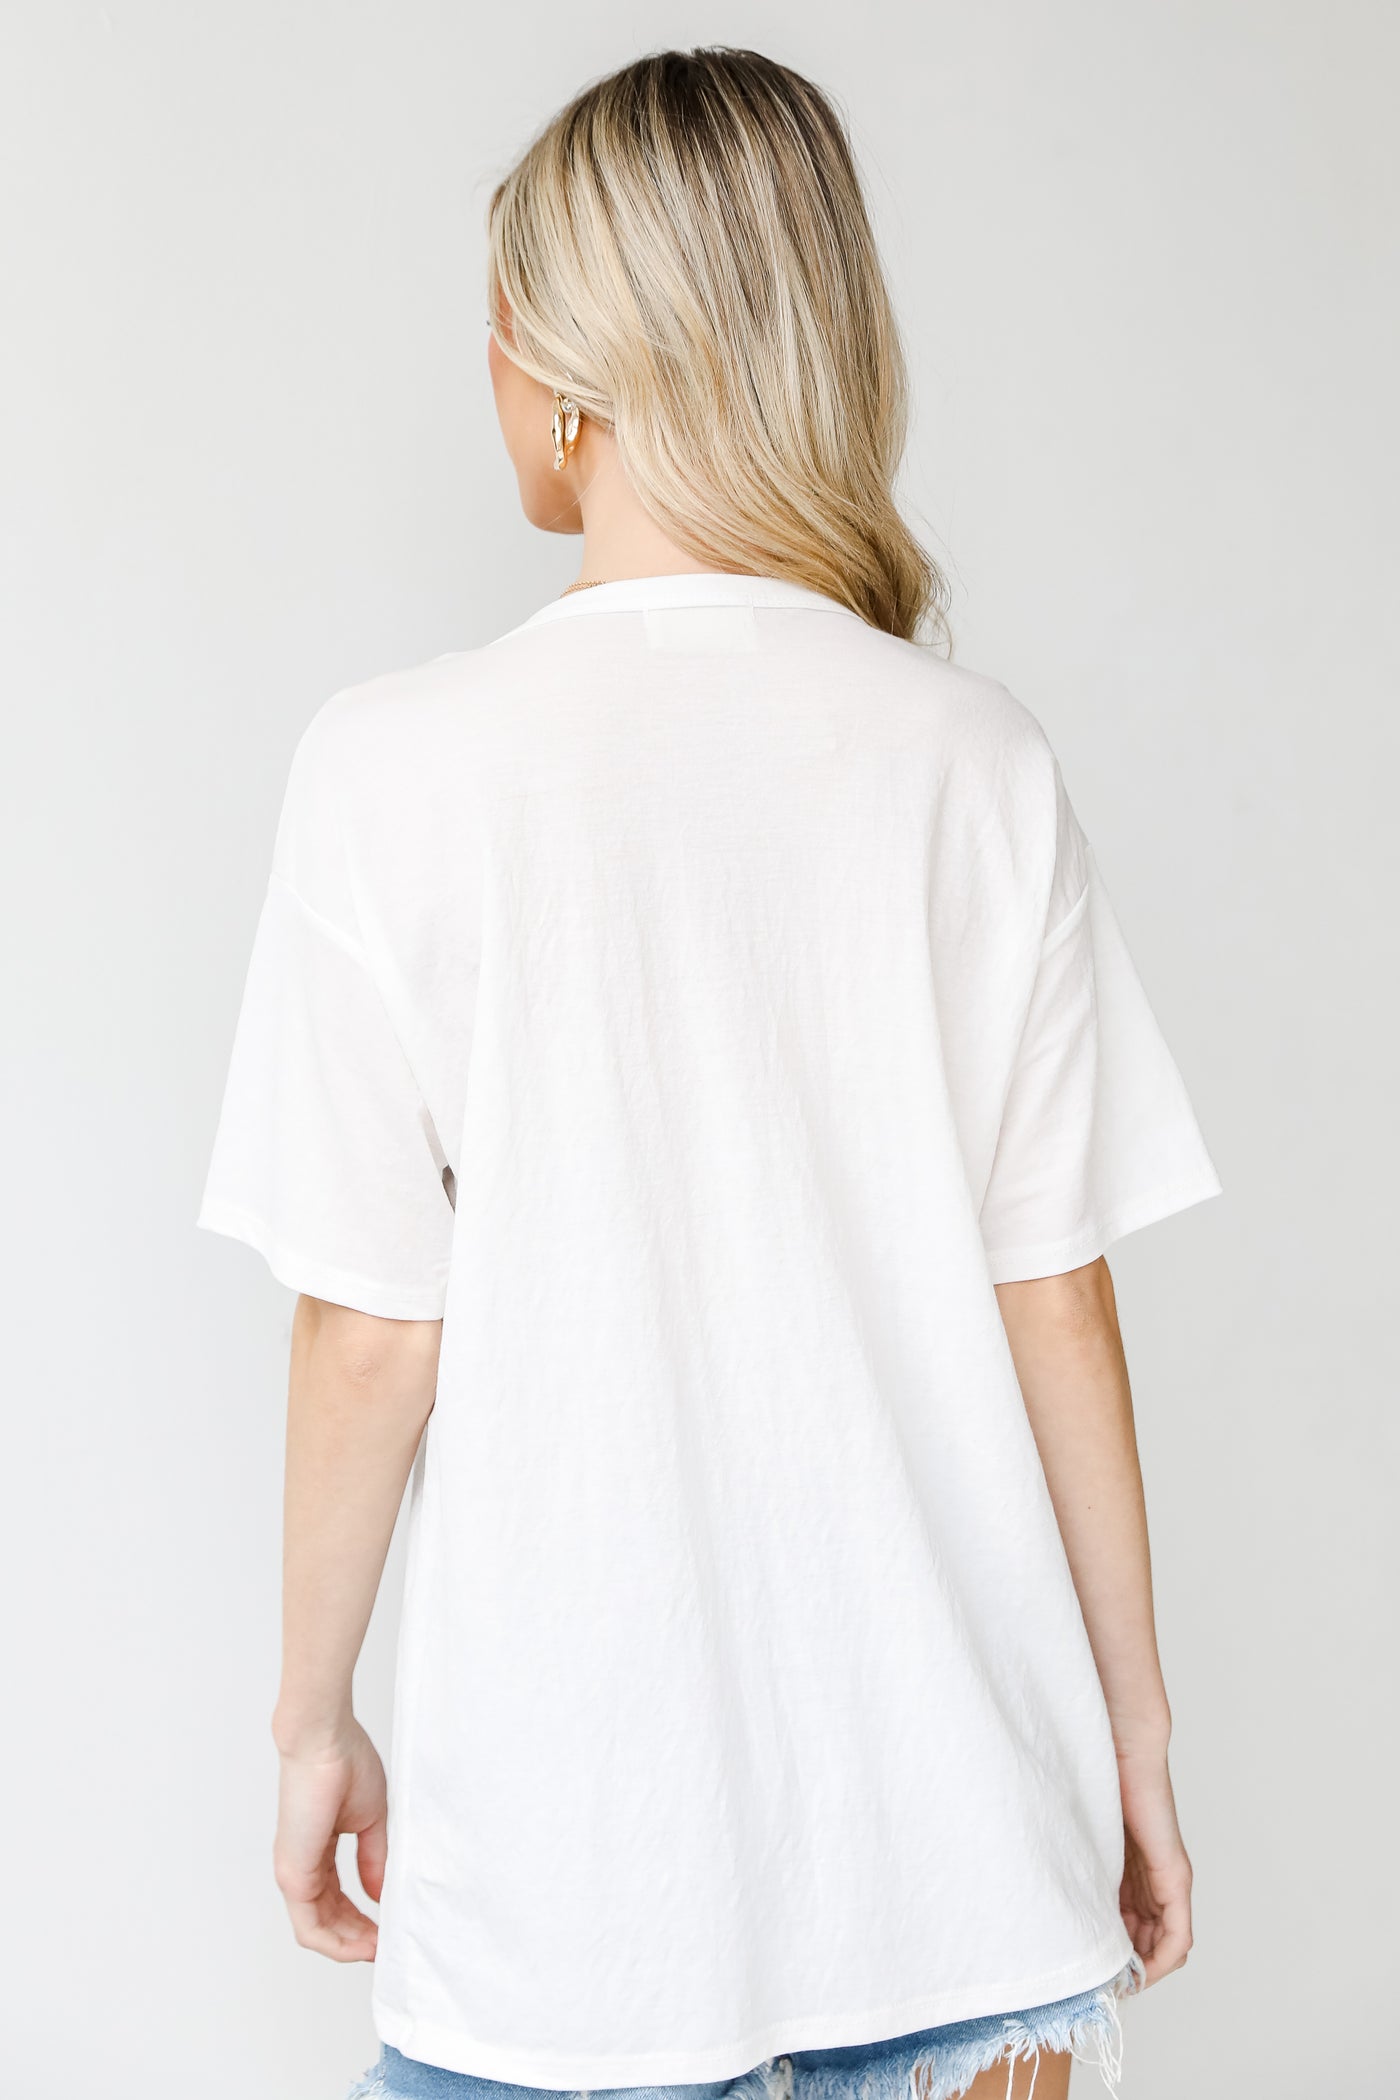 Tee in ivory back view